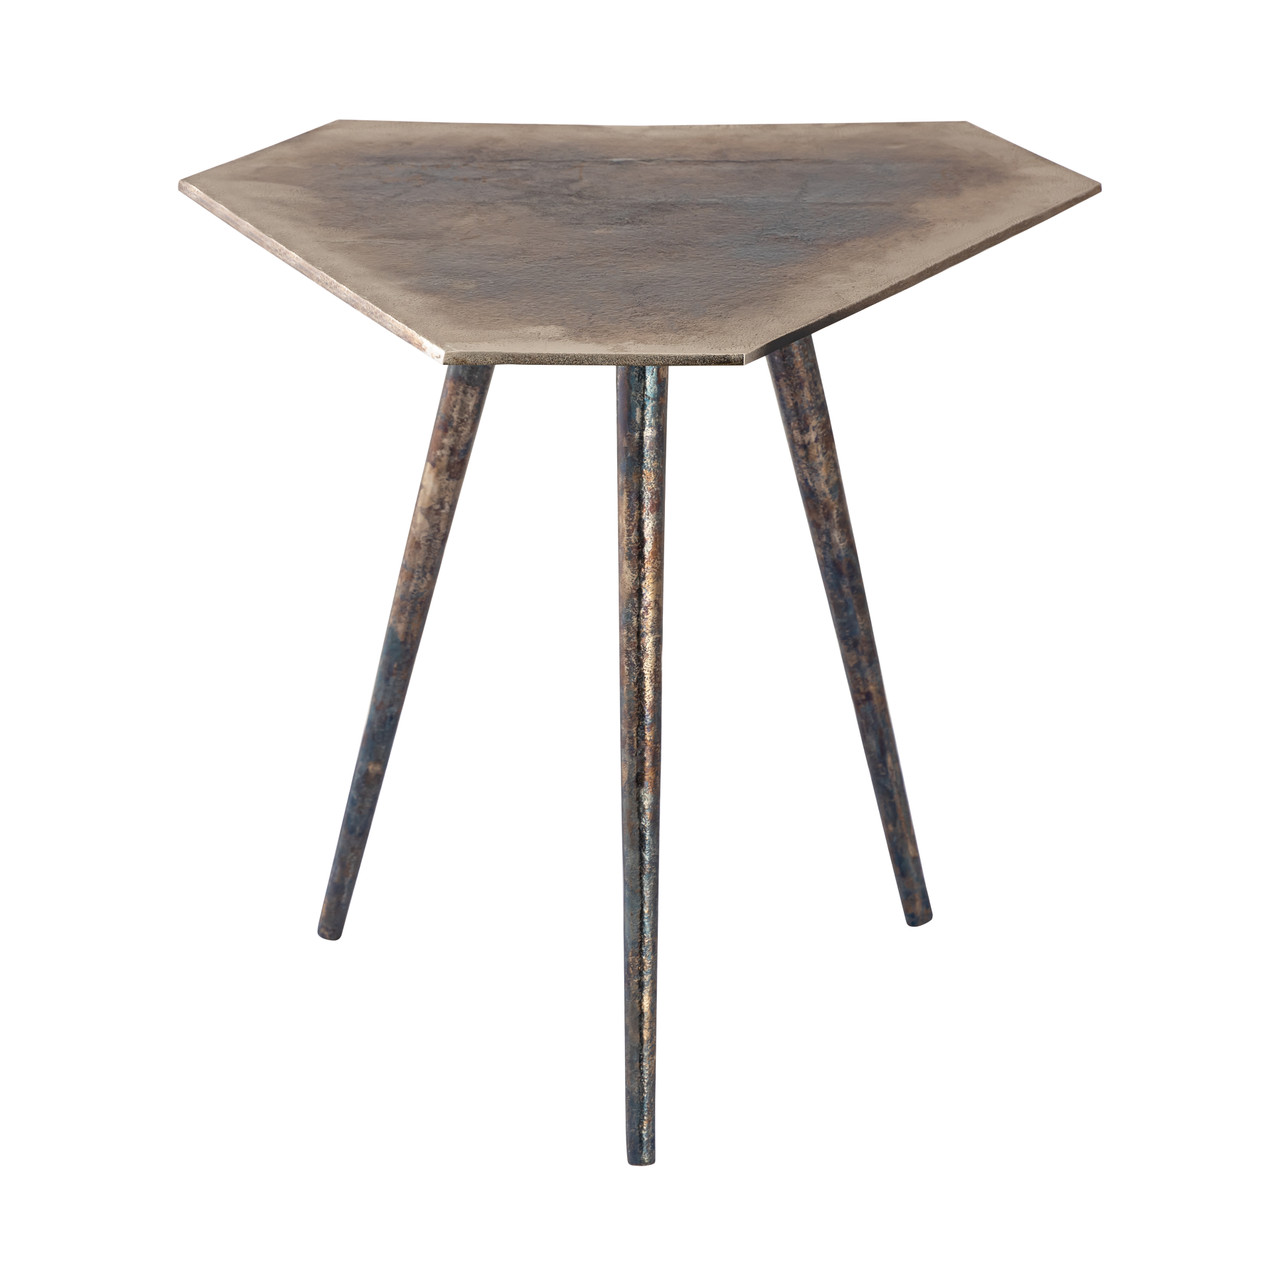 ELK HOME H0895-10480 Carleton Accent Table - Oxidized Nickle